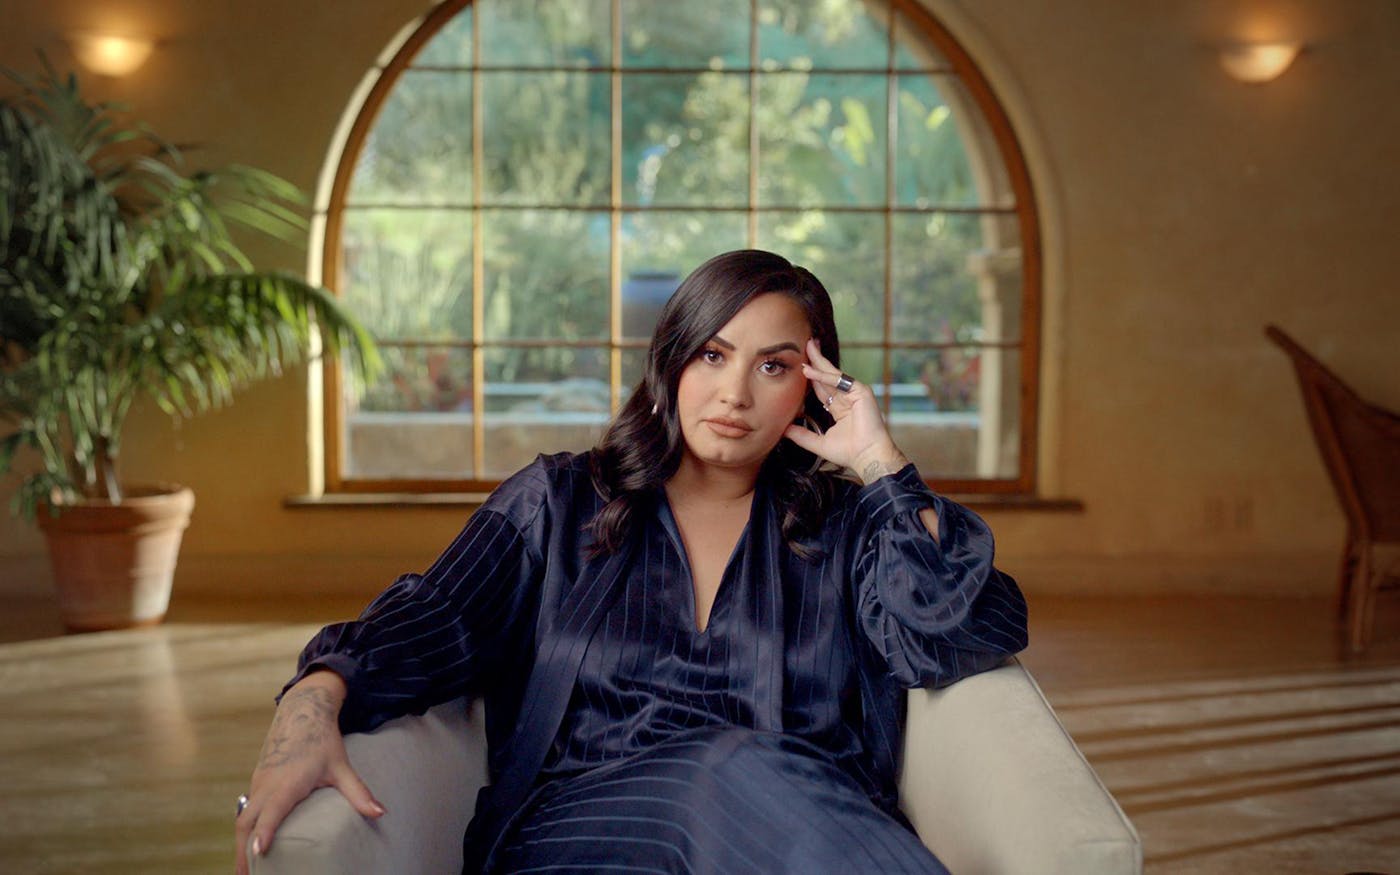 Demi Lovato marries in heartbreaking 'Tell Me You Love Me' music video